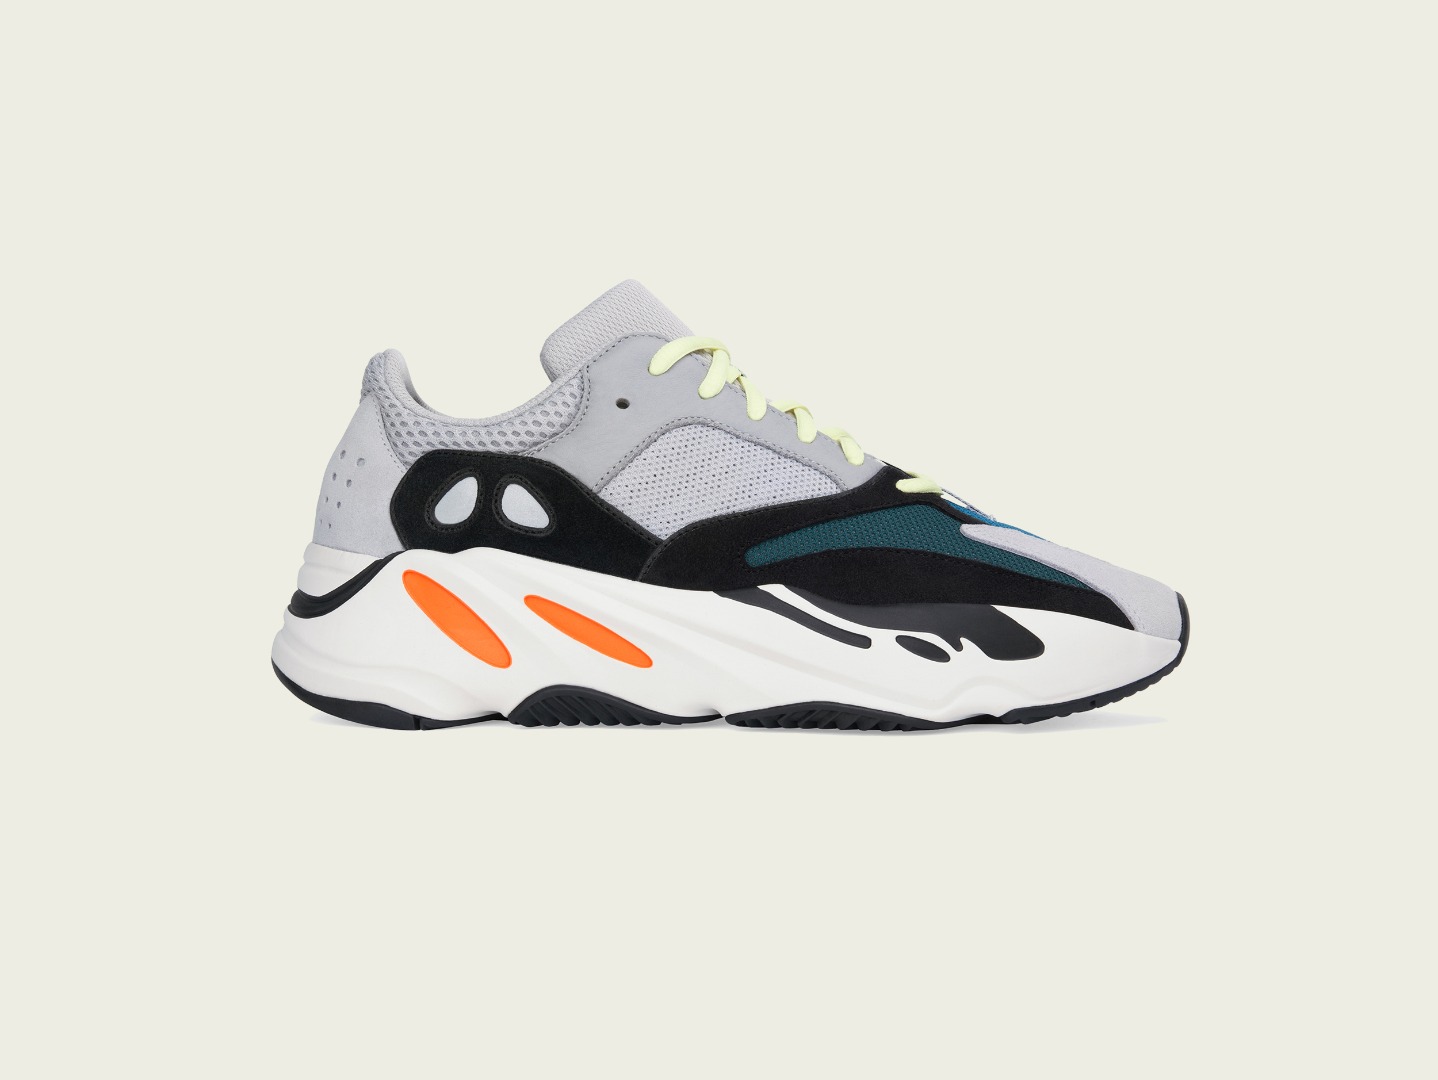 YEEZY BOOST 700 MGH SOLID GREY/CHALK WHITE/CORE BLACK